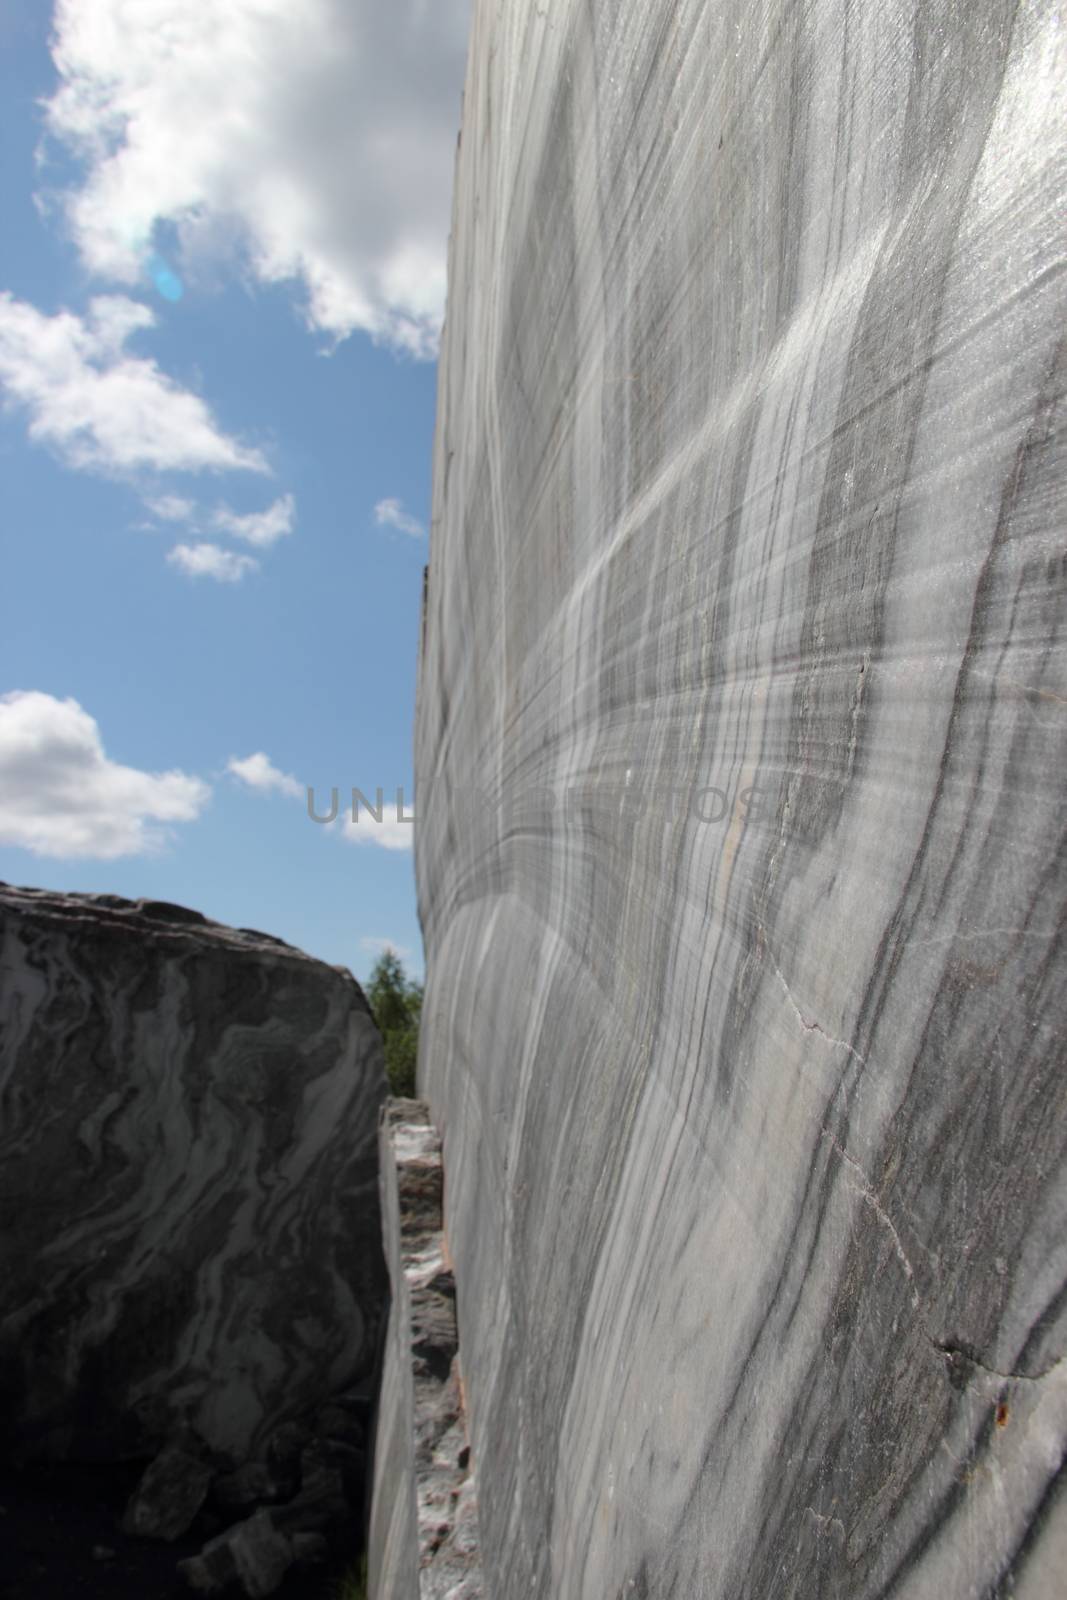 The giant marble cut by Metanna